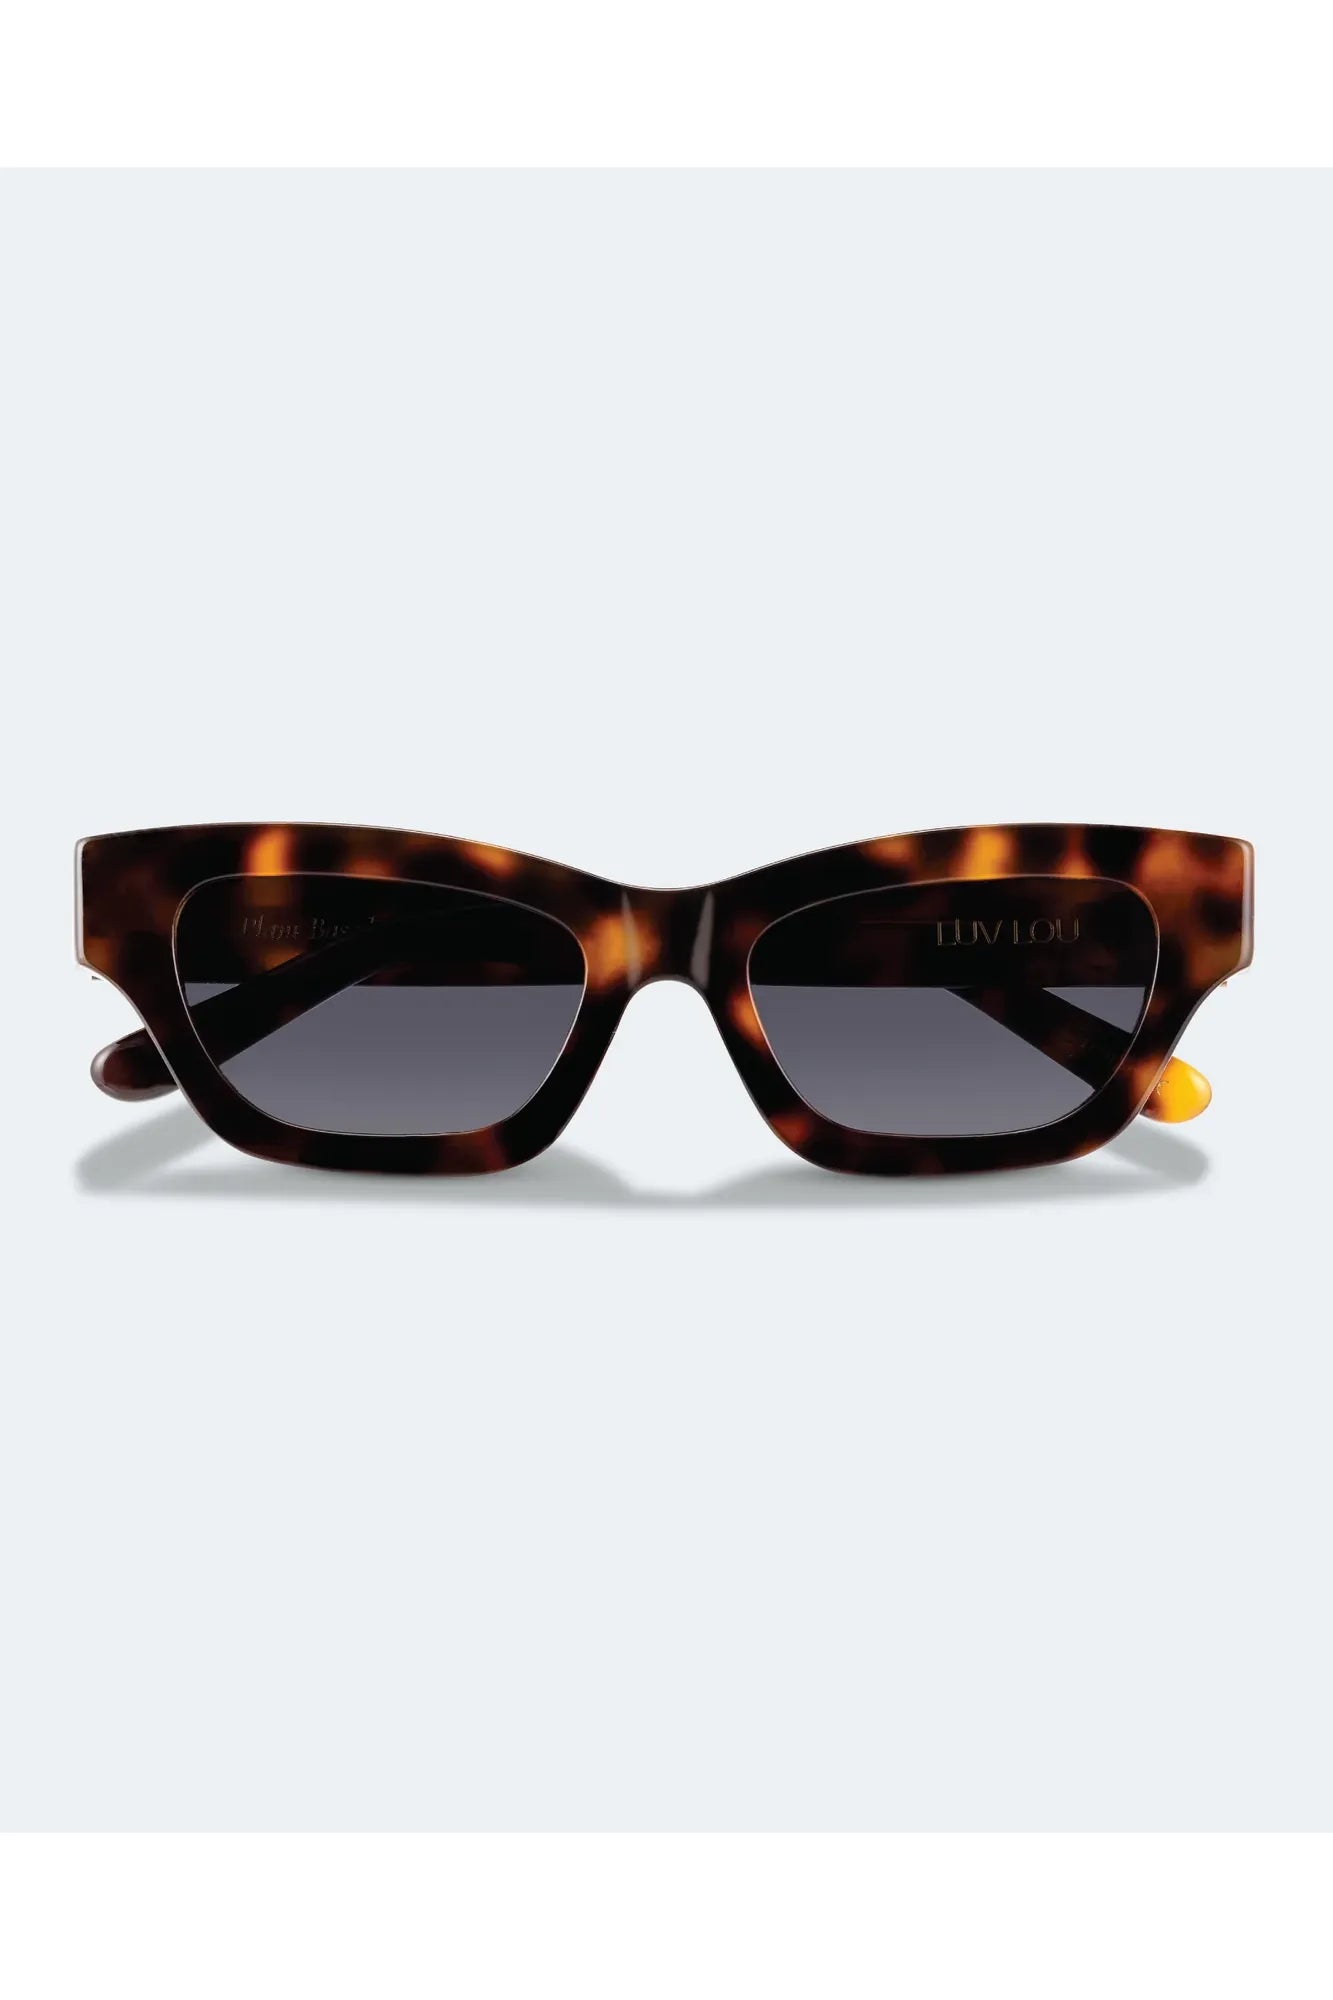 The Carmel Sunglasses in Tort by Luv Lou